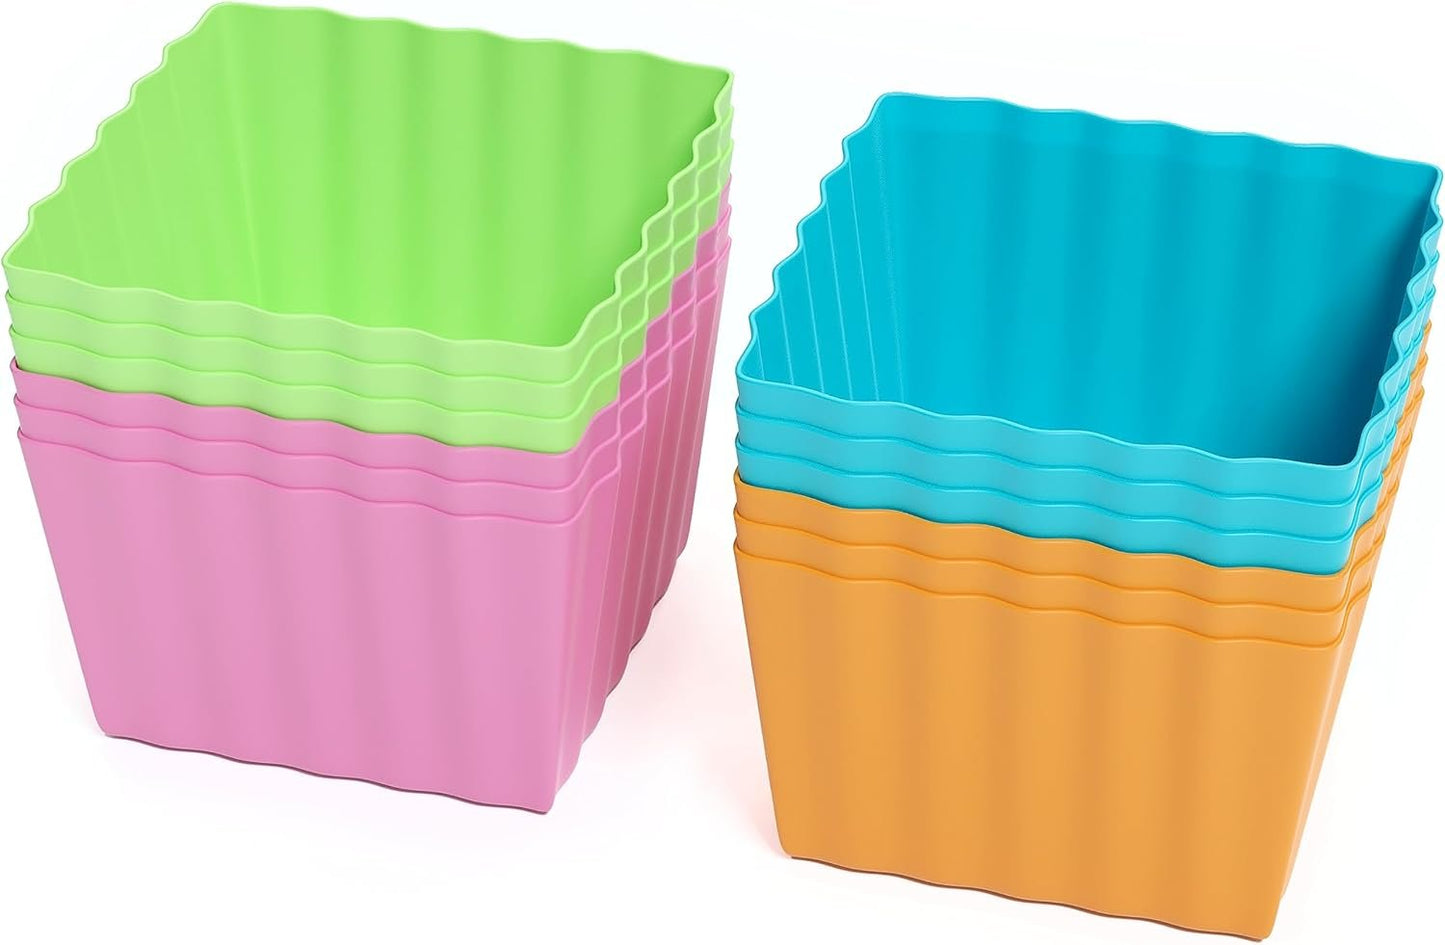 Bakerpan Silicone Square Molds for Baking, Square Baking Cups, Mini Cake Molds